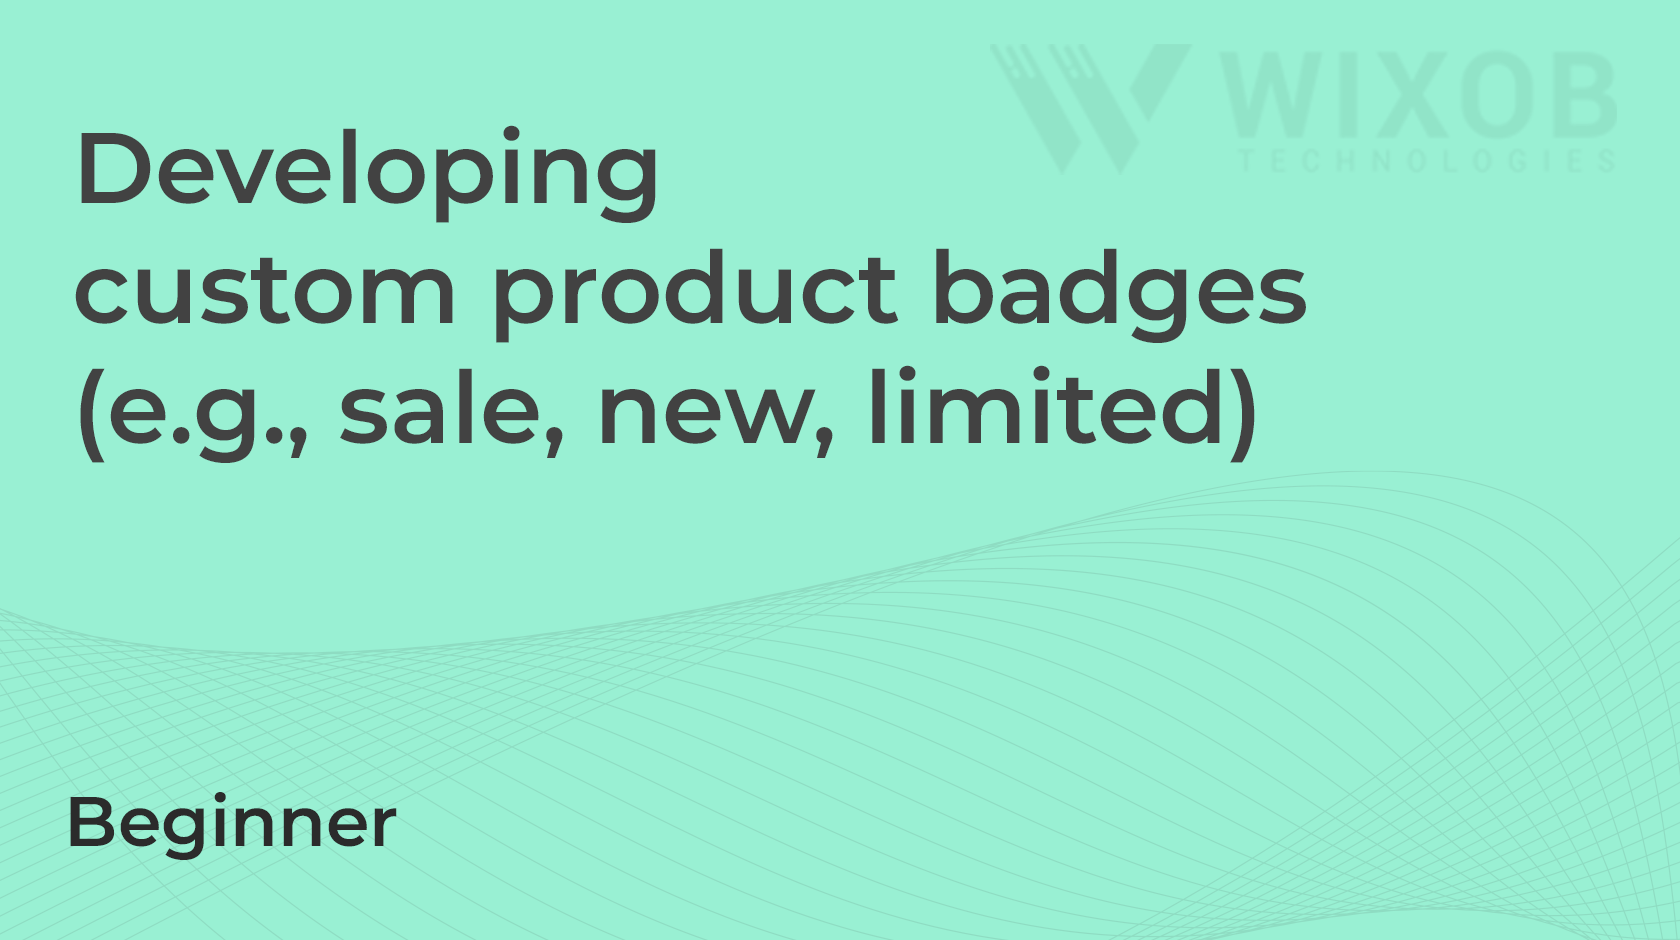 Developing custom product badges (e.g., sale, new, limited)